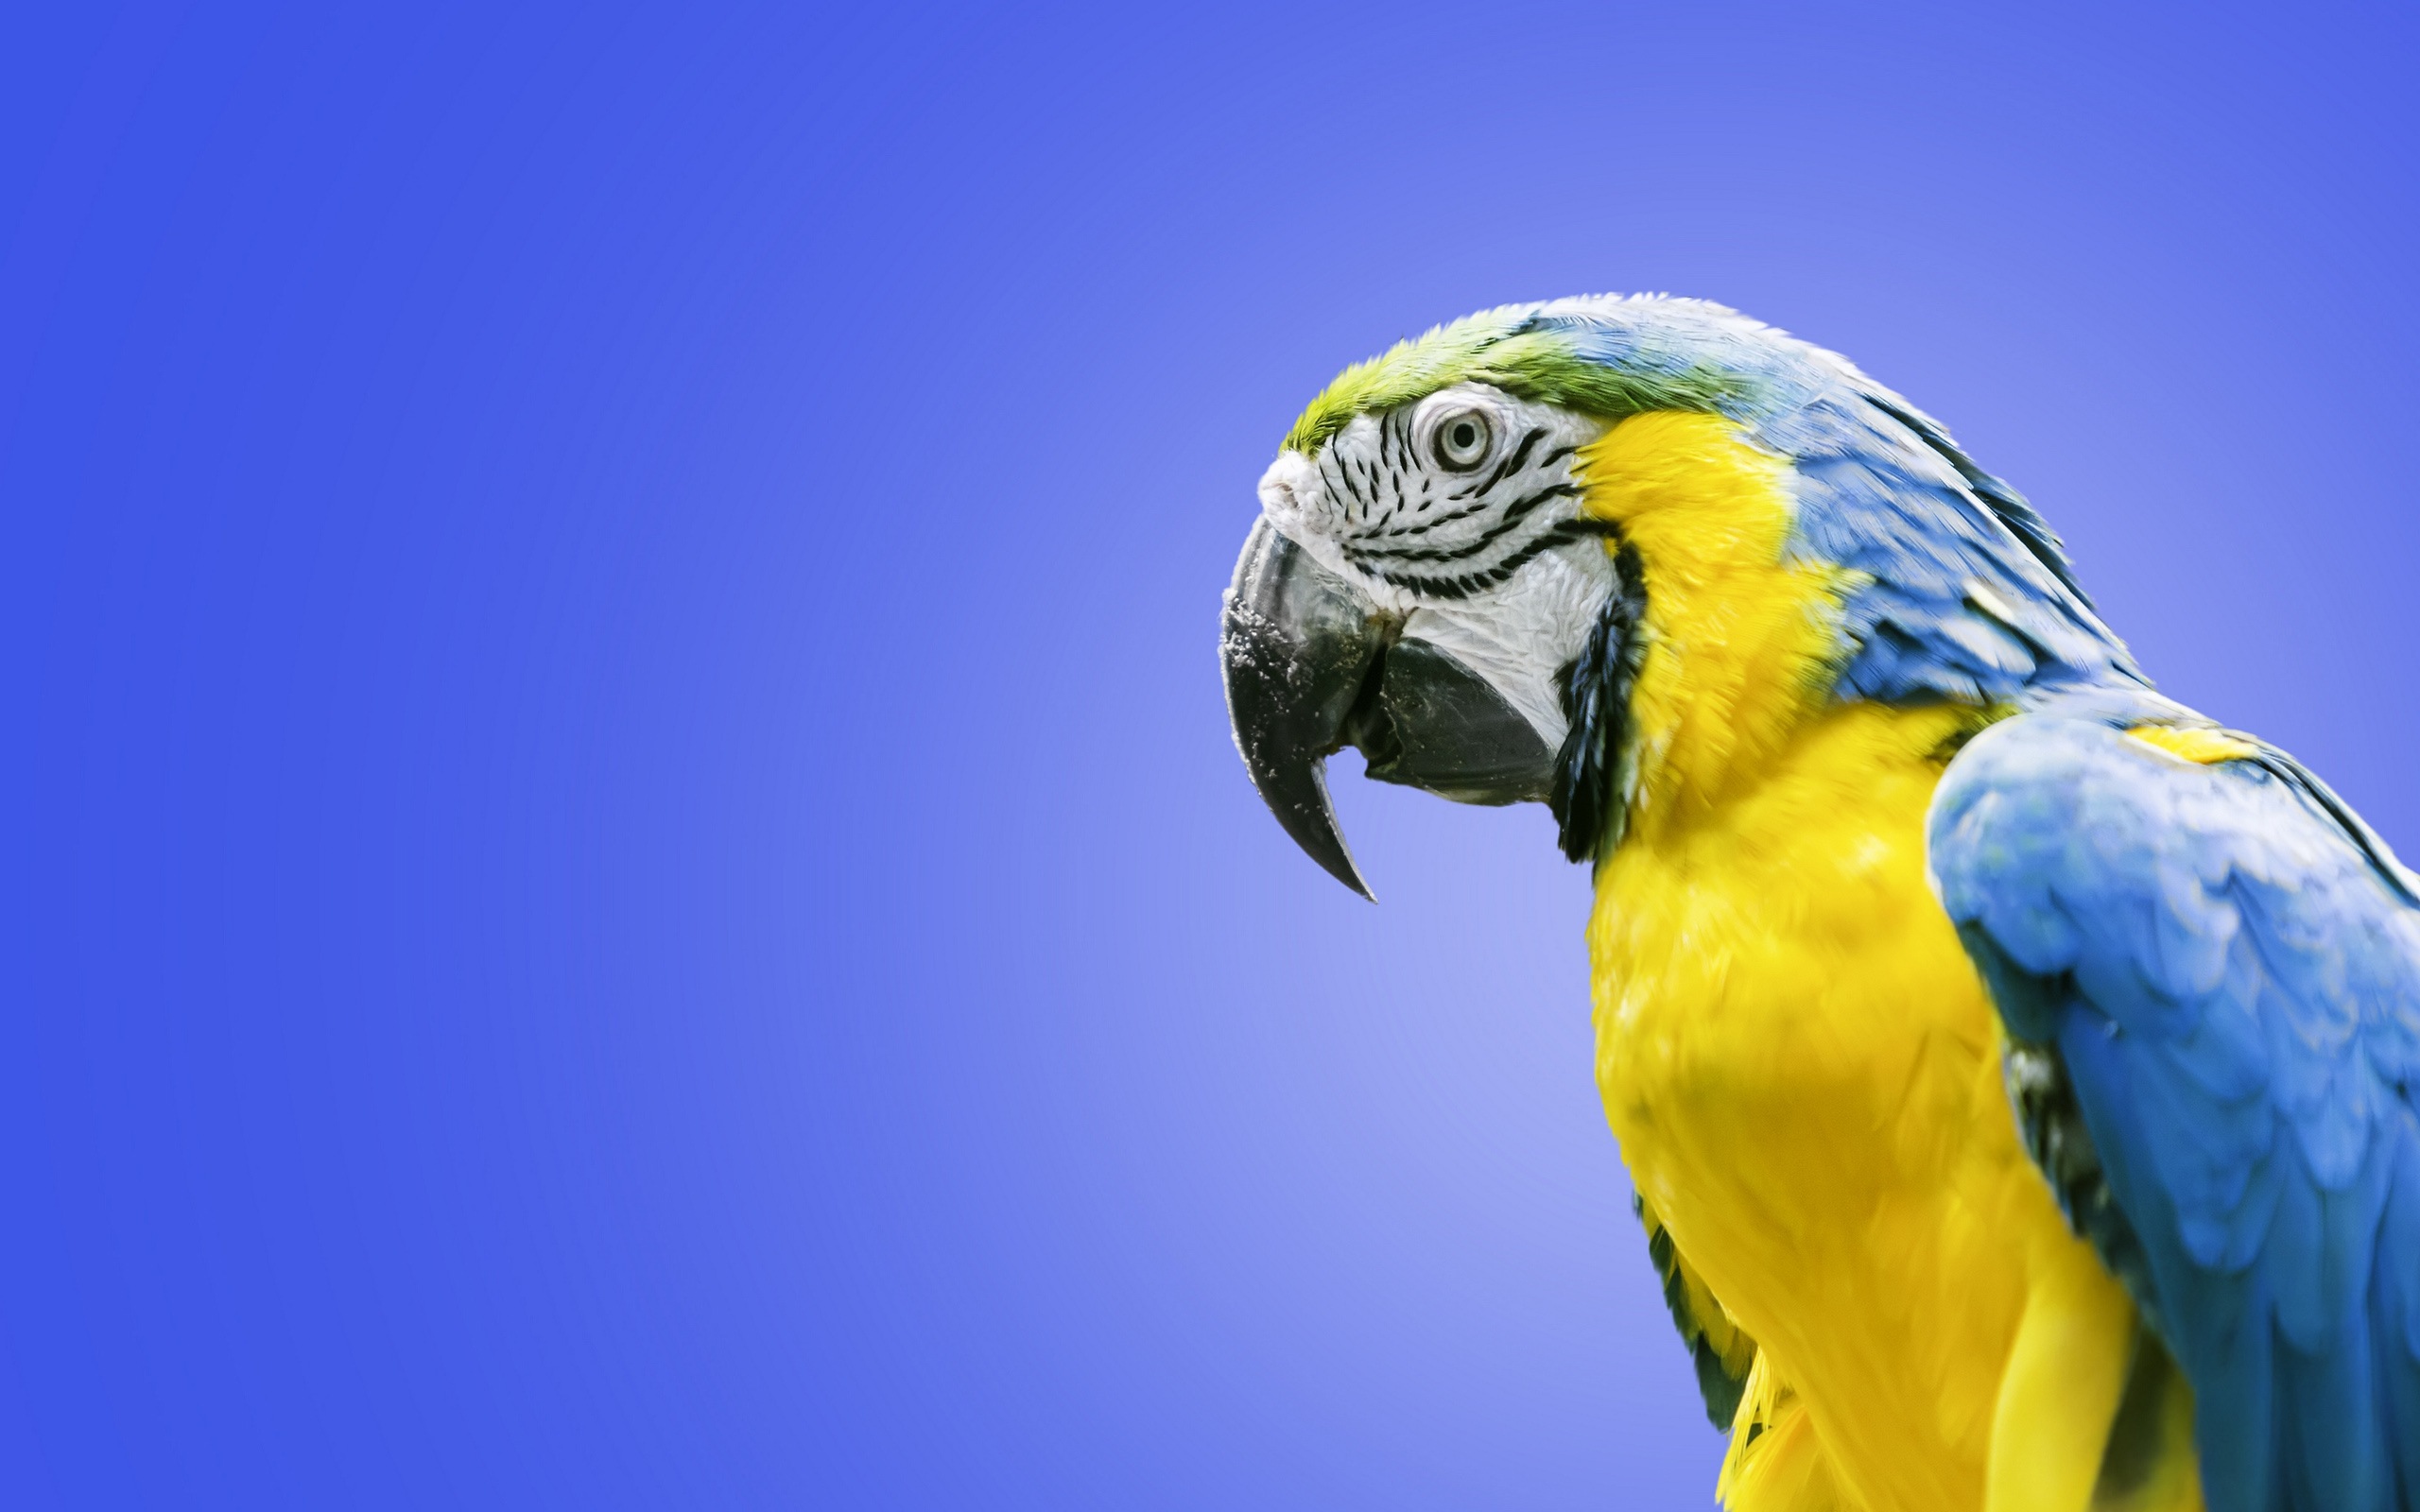 Macaw close-up HD wallpapers #24 - 2560x1600